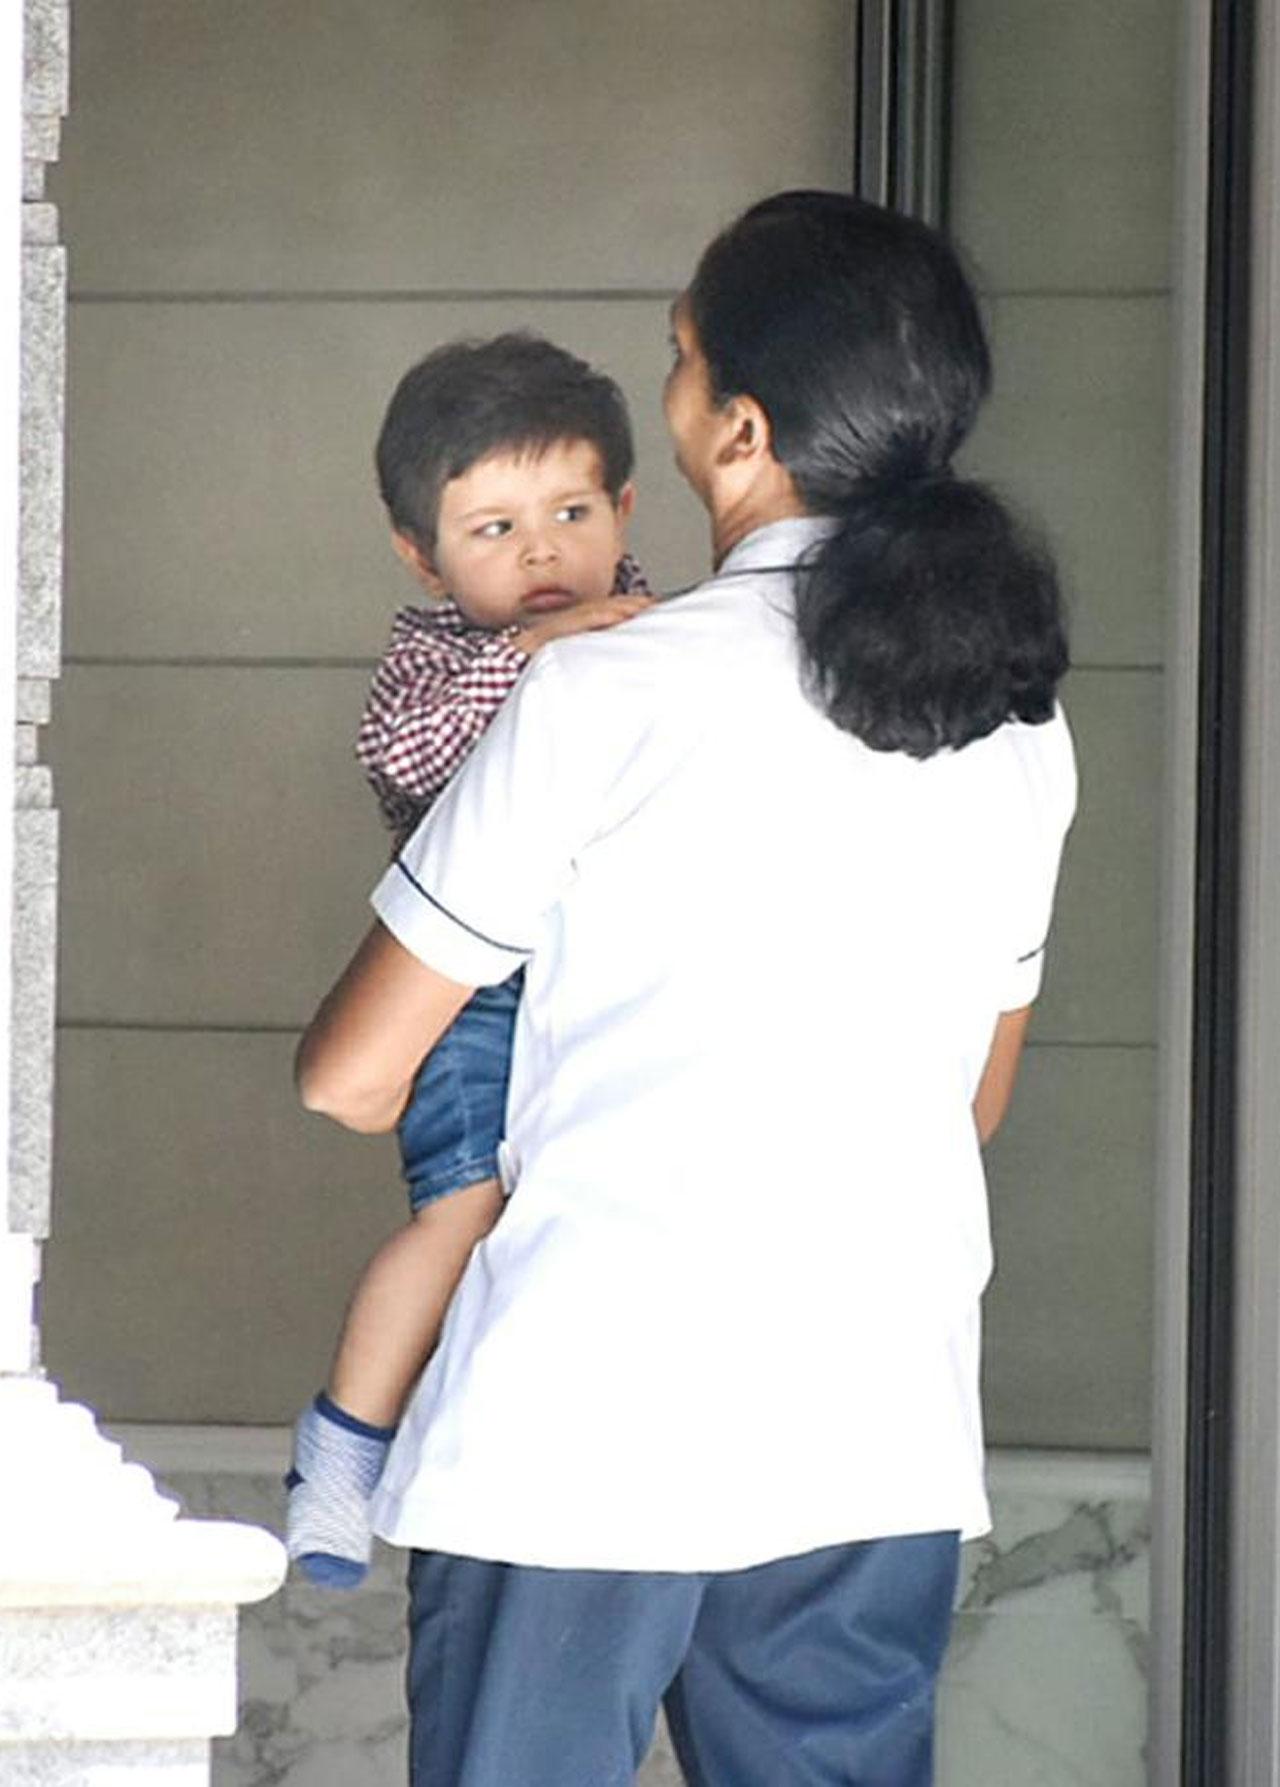 Kareena Kapoor Khan's second baby boy Jehangir Ali Khan turned one on February 21. He was spotted with his mother and aunt Karisma Kapoor at his grandfather Randhir Kapoor's residence. As always, he was looking adorable.